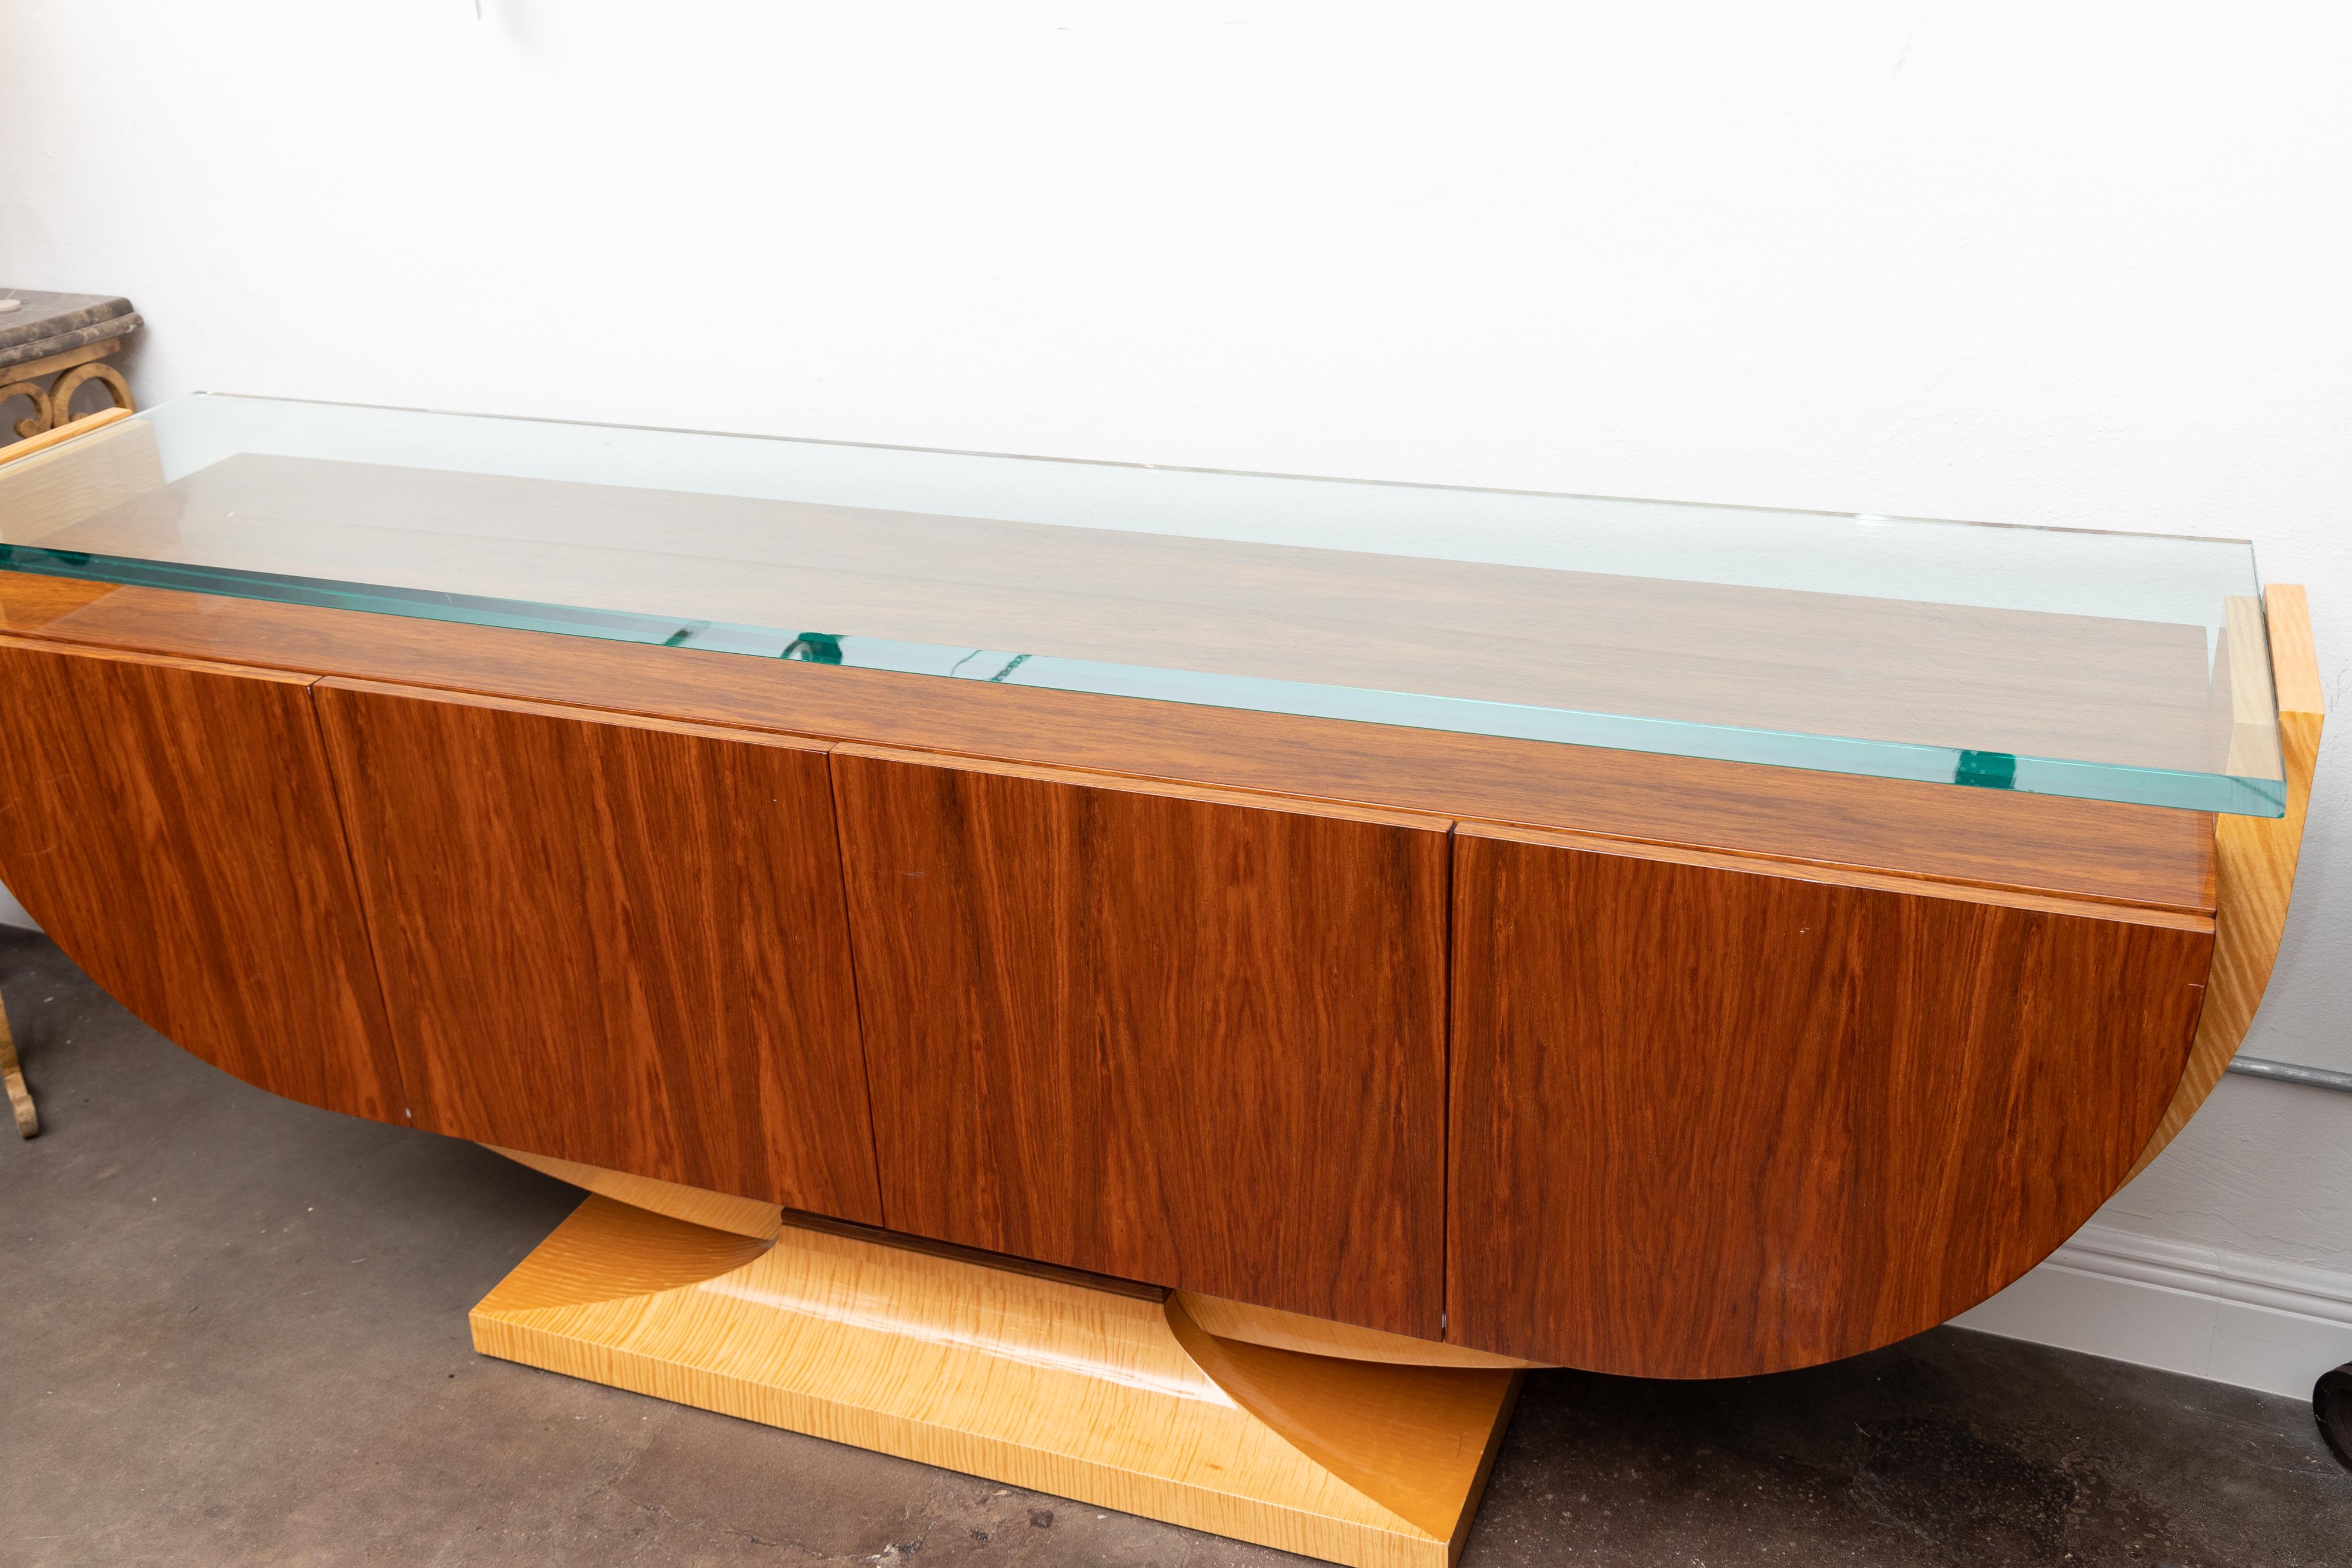 This is a graceful Italian rosewood credenza with a thick glass super structure above a rosewood top over a long cabinet with two central doors opening to reveal two banks of shelving. The cabinet section is in the shape of a demi-ellipse, situated